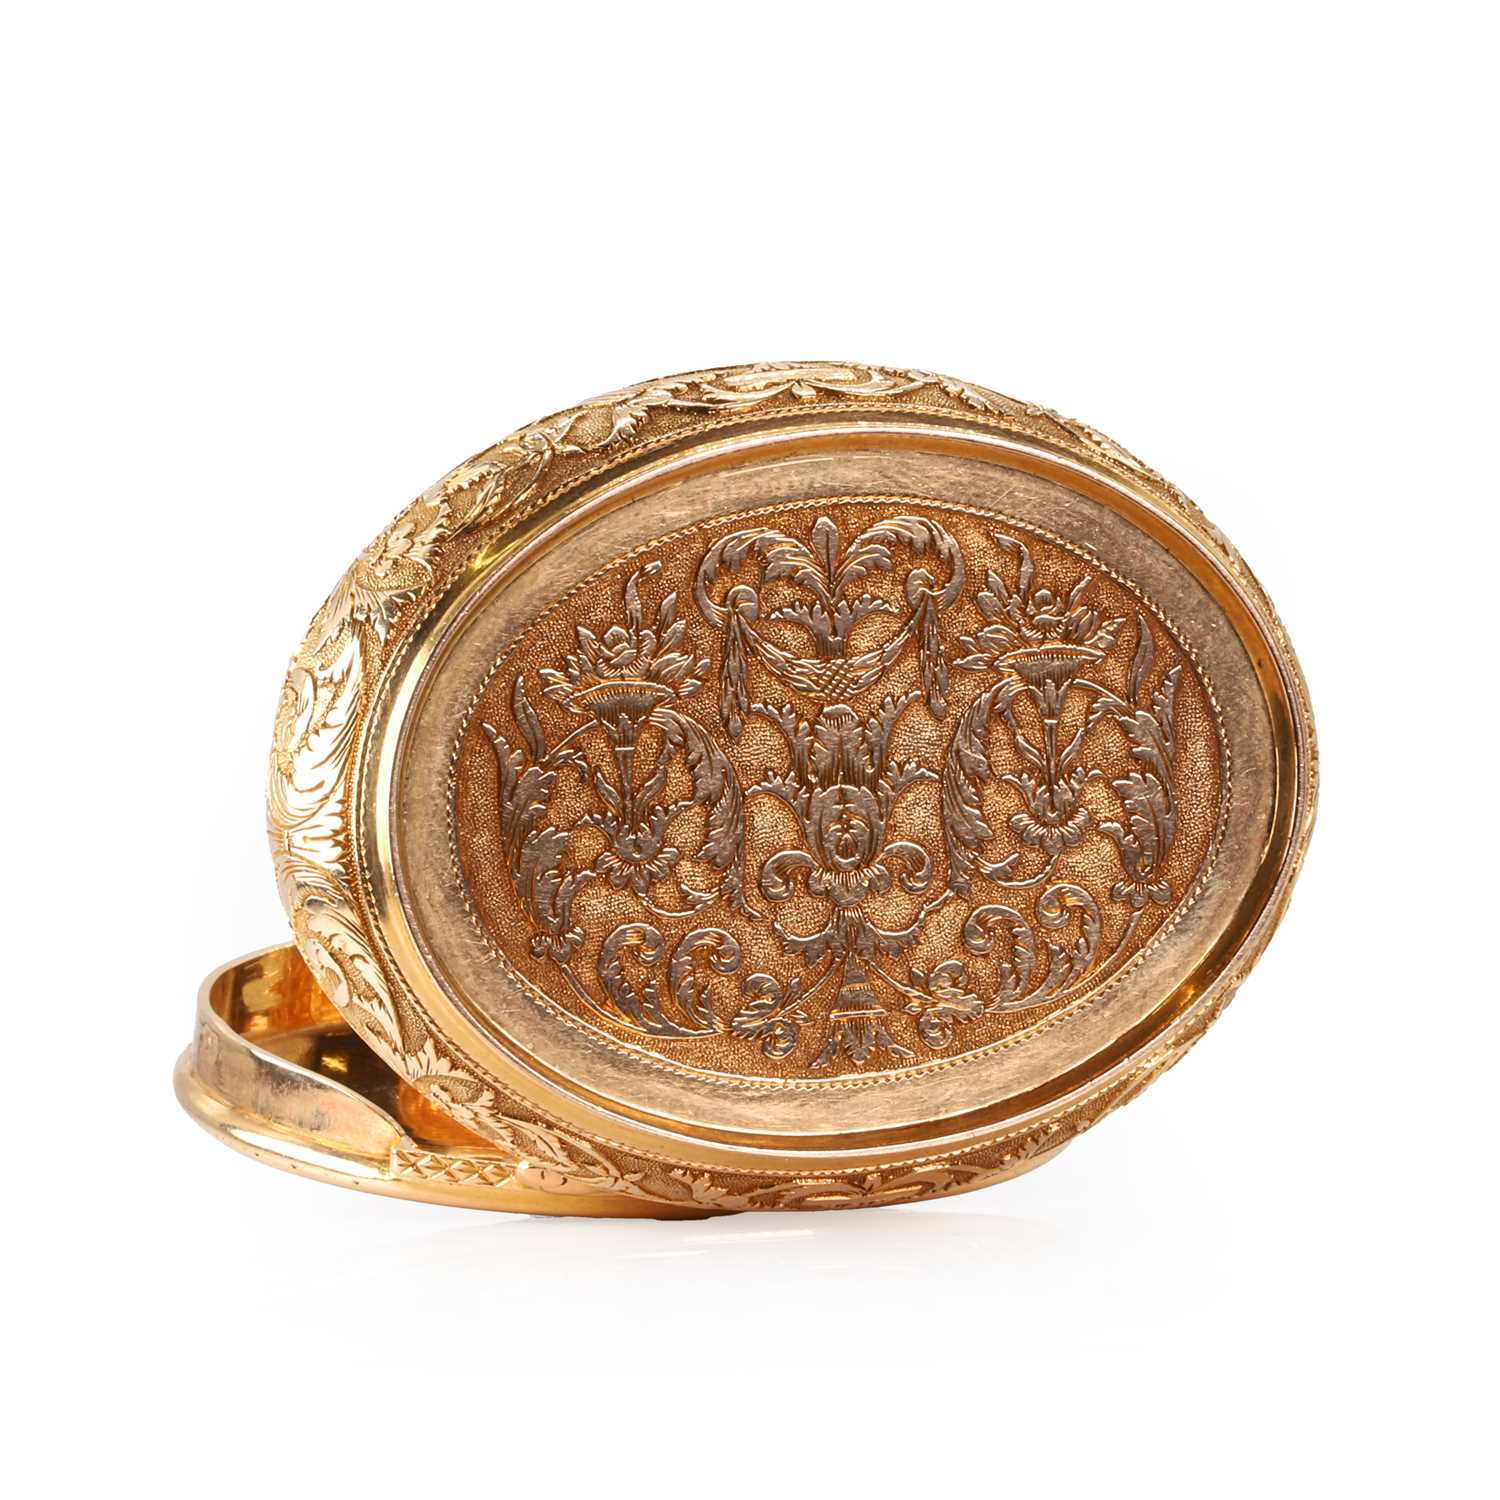 A French gold oval snuffbox, - Image 5 of 7